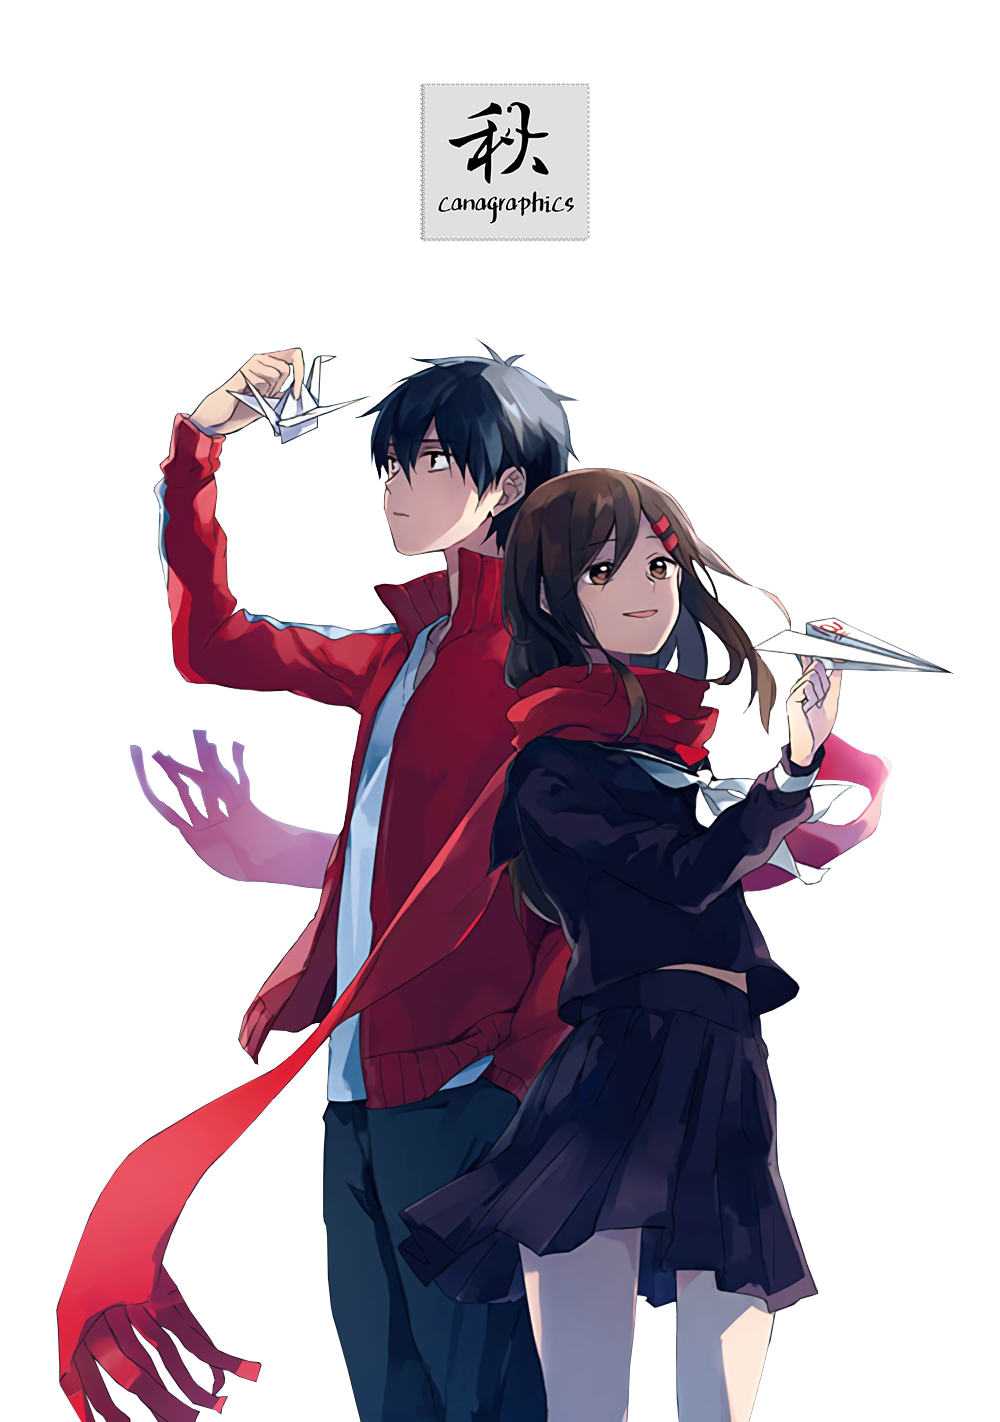 [RENDER] Kagerou Project - Shintaro + Ayano by canagraphics on DeviantArt